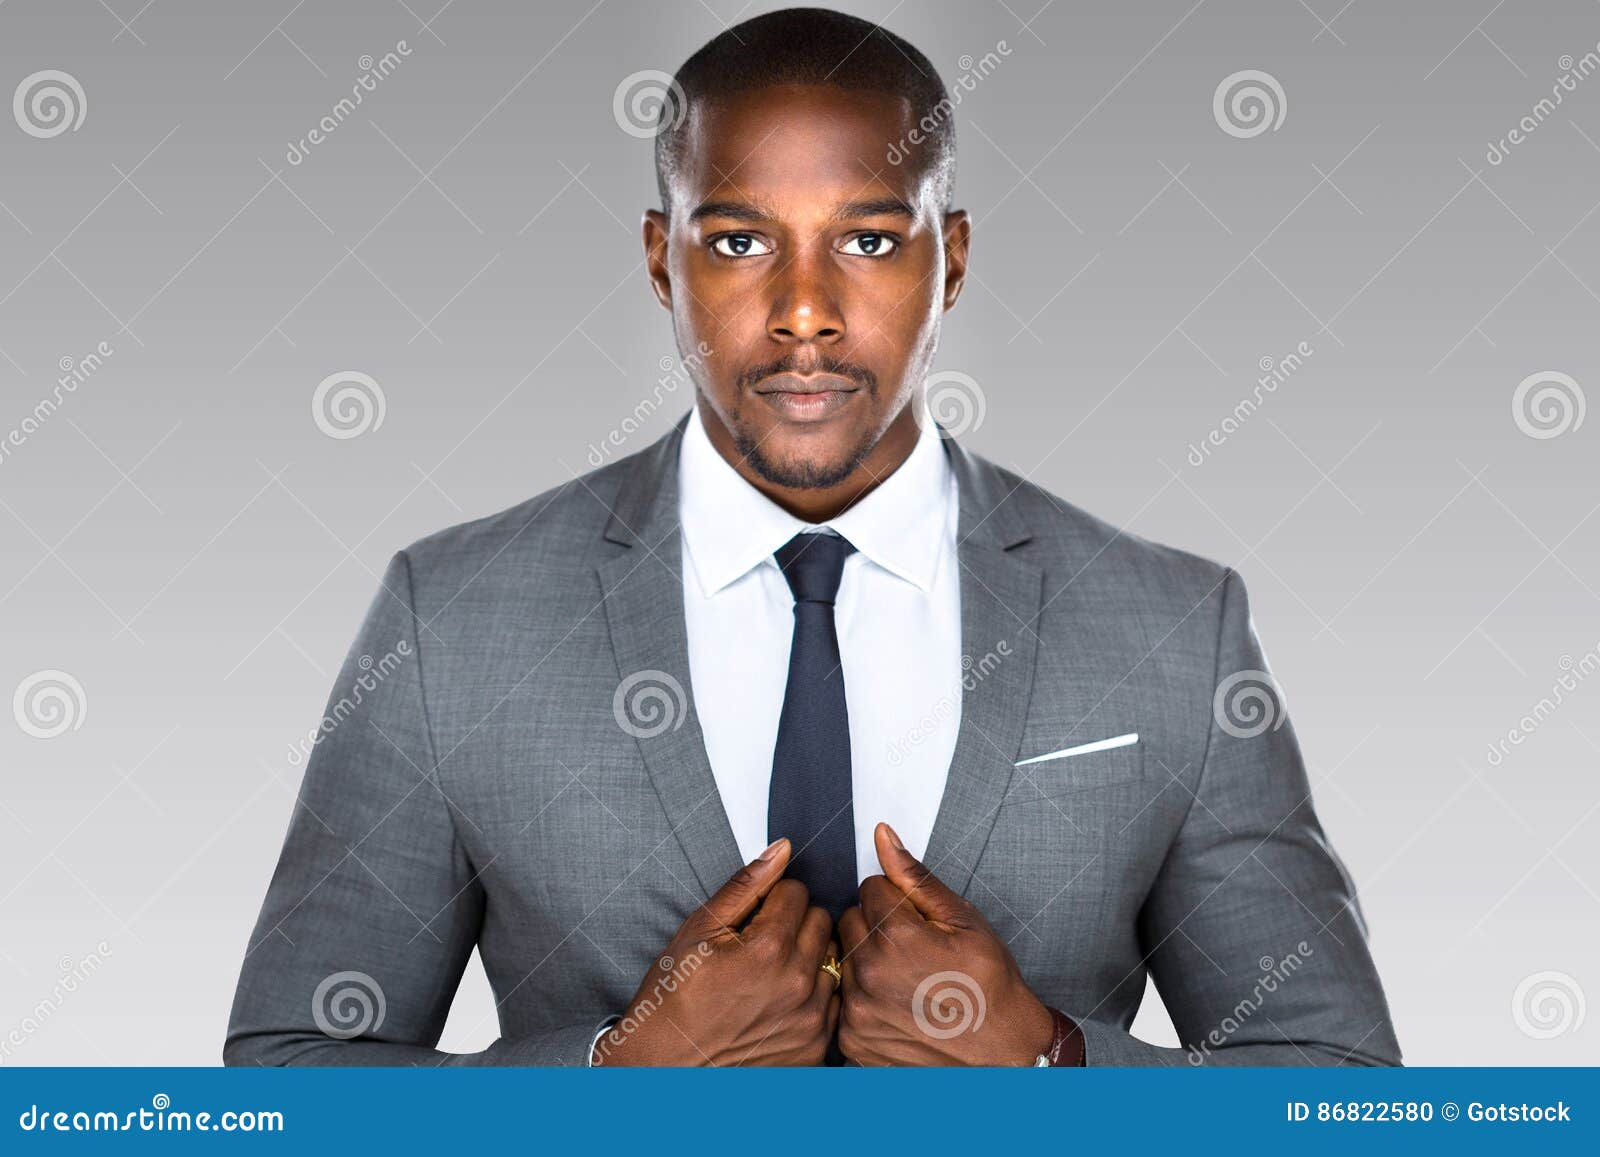 strong powerful modern businessman pose looking confident successful accomplished driven intense